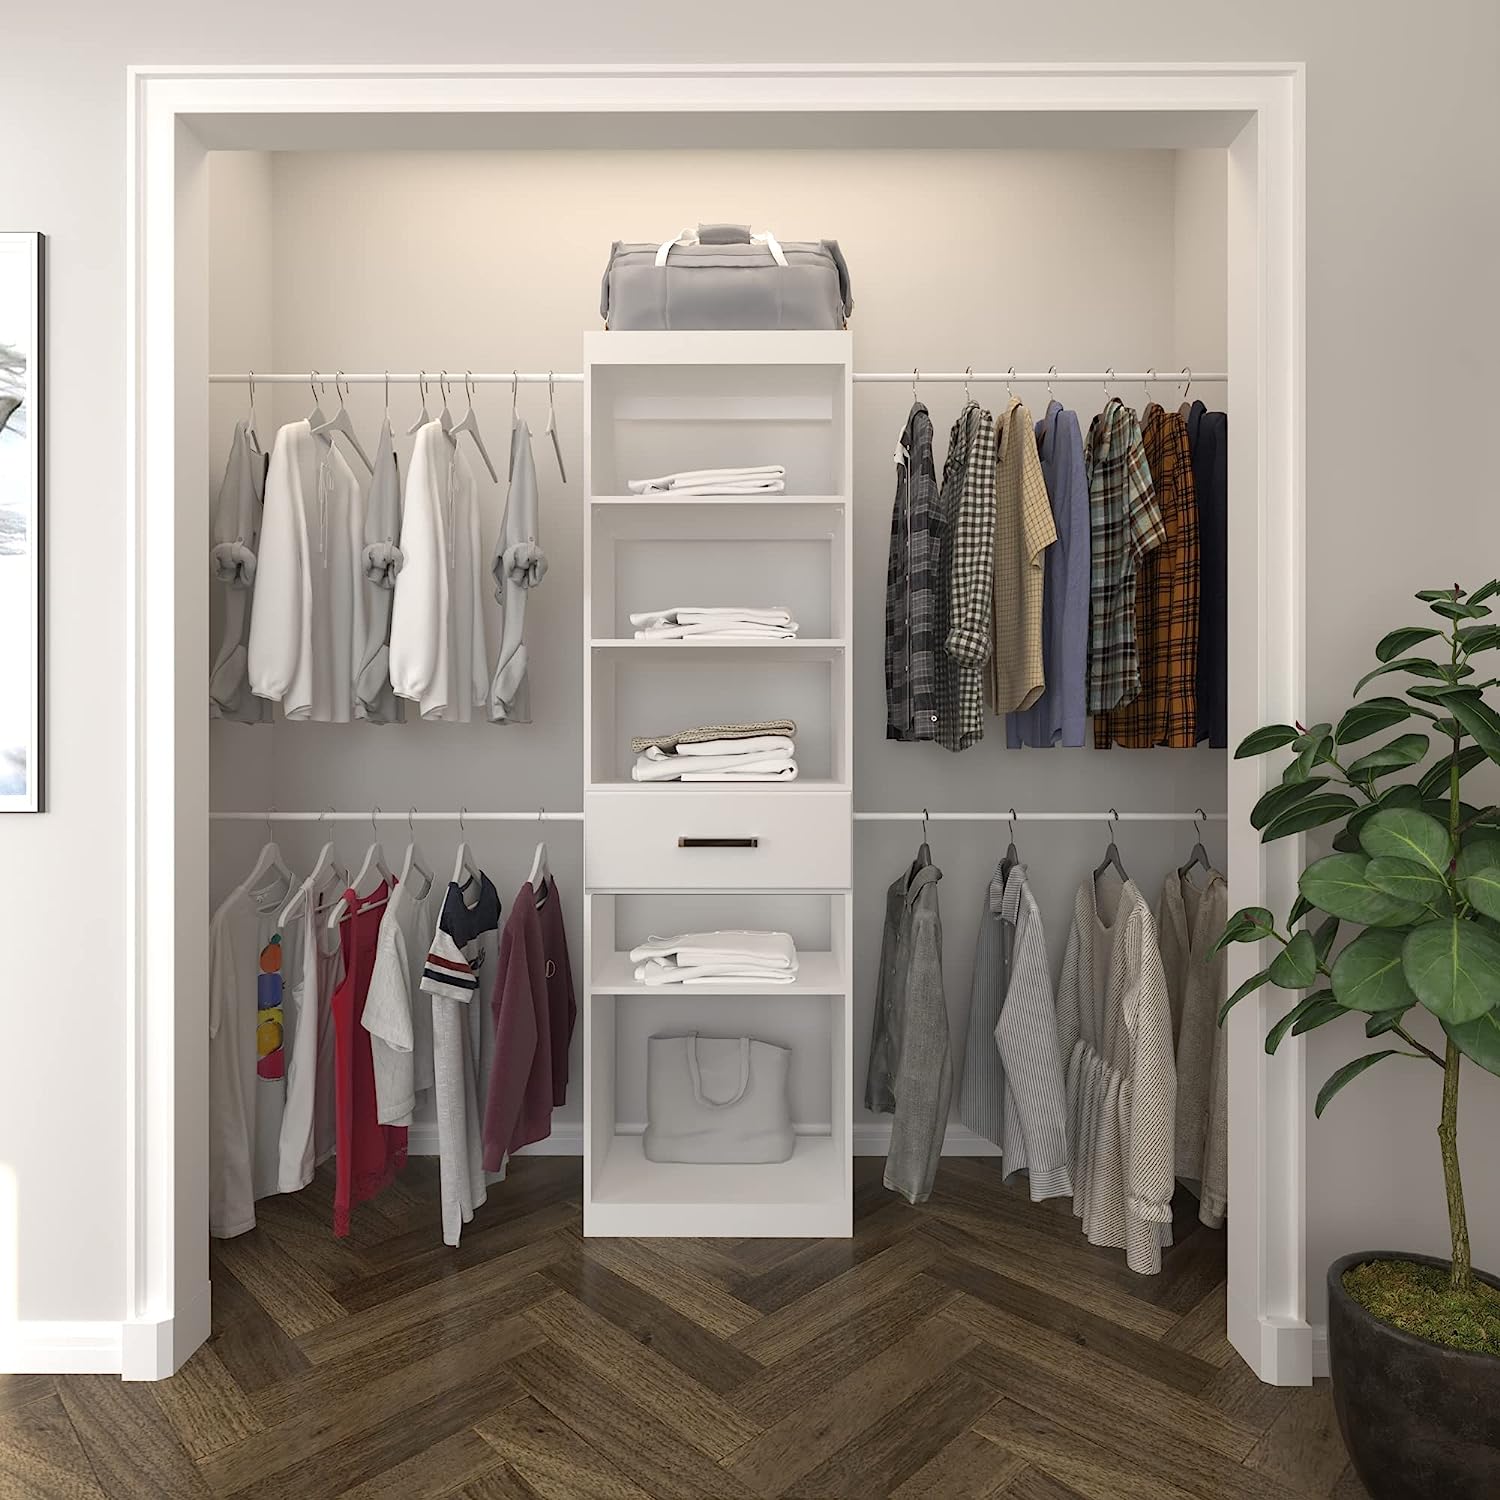 SOLRIG Closet System Tower Kits, Including Clothes [...]